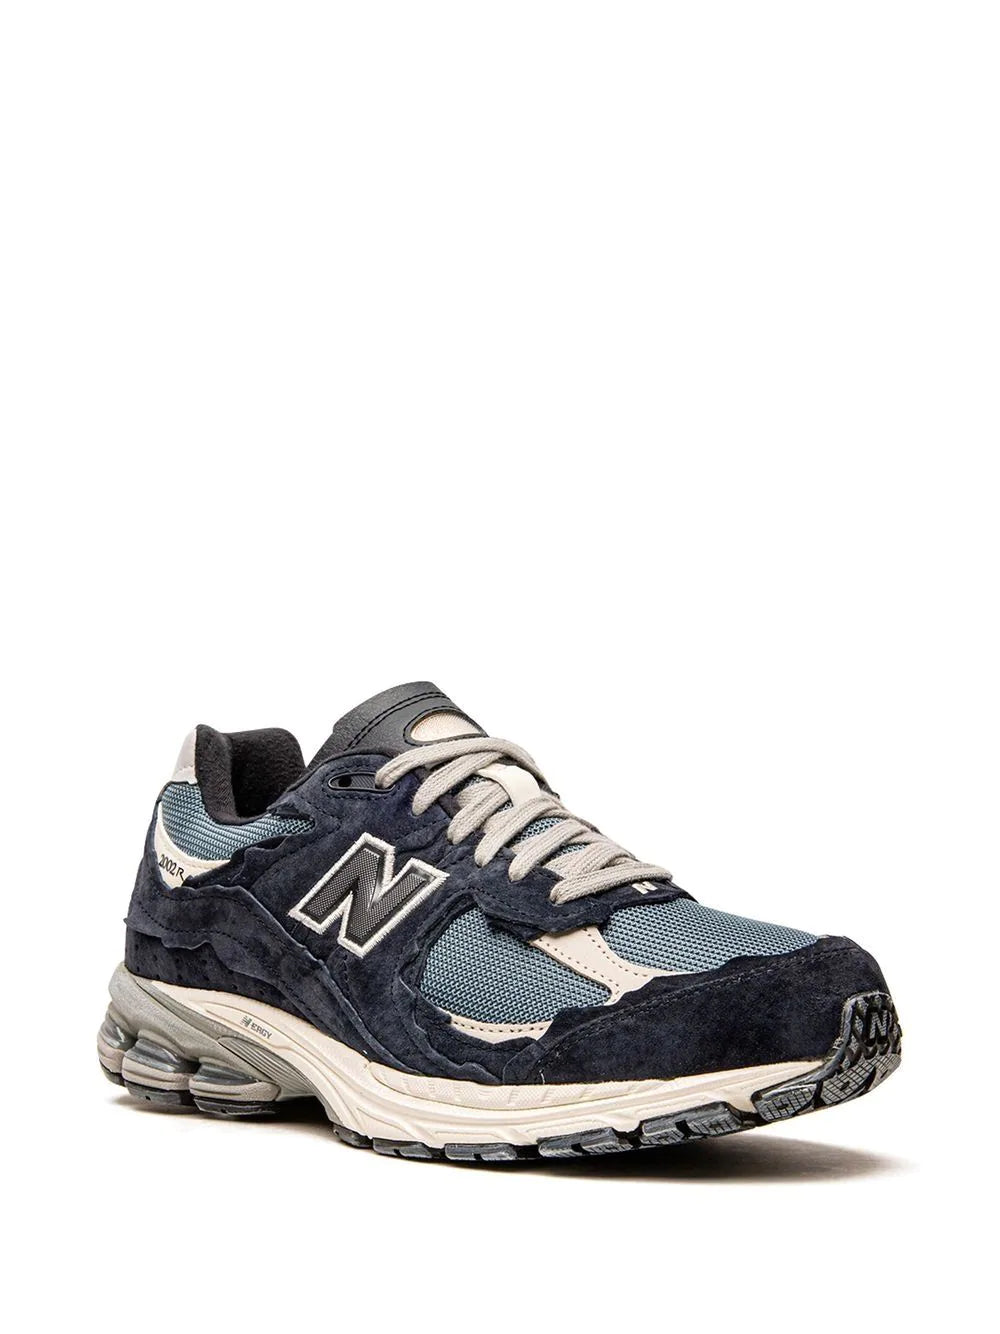 Shoellist | New Balance 2002R Protection Pack - Dark Navy sneakers